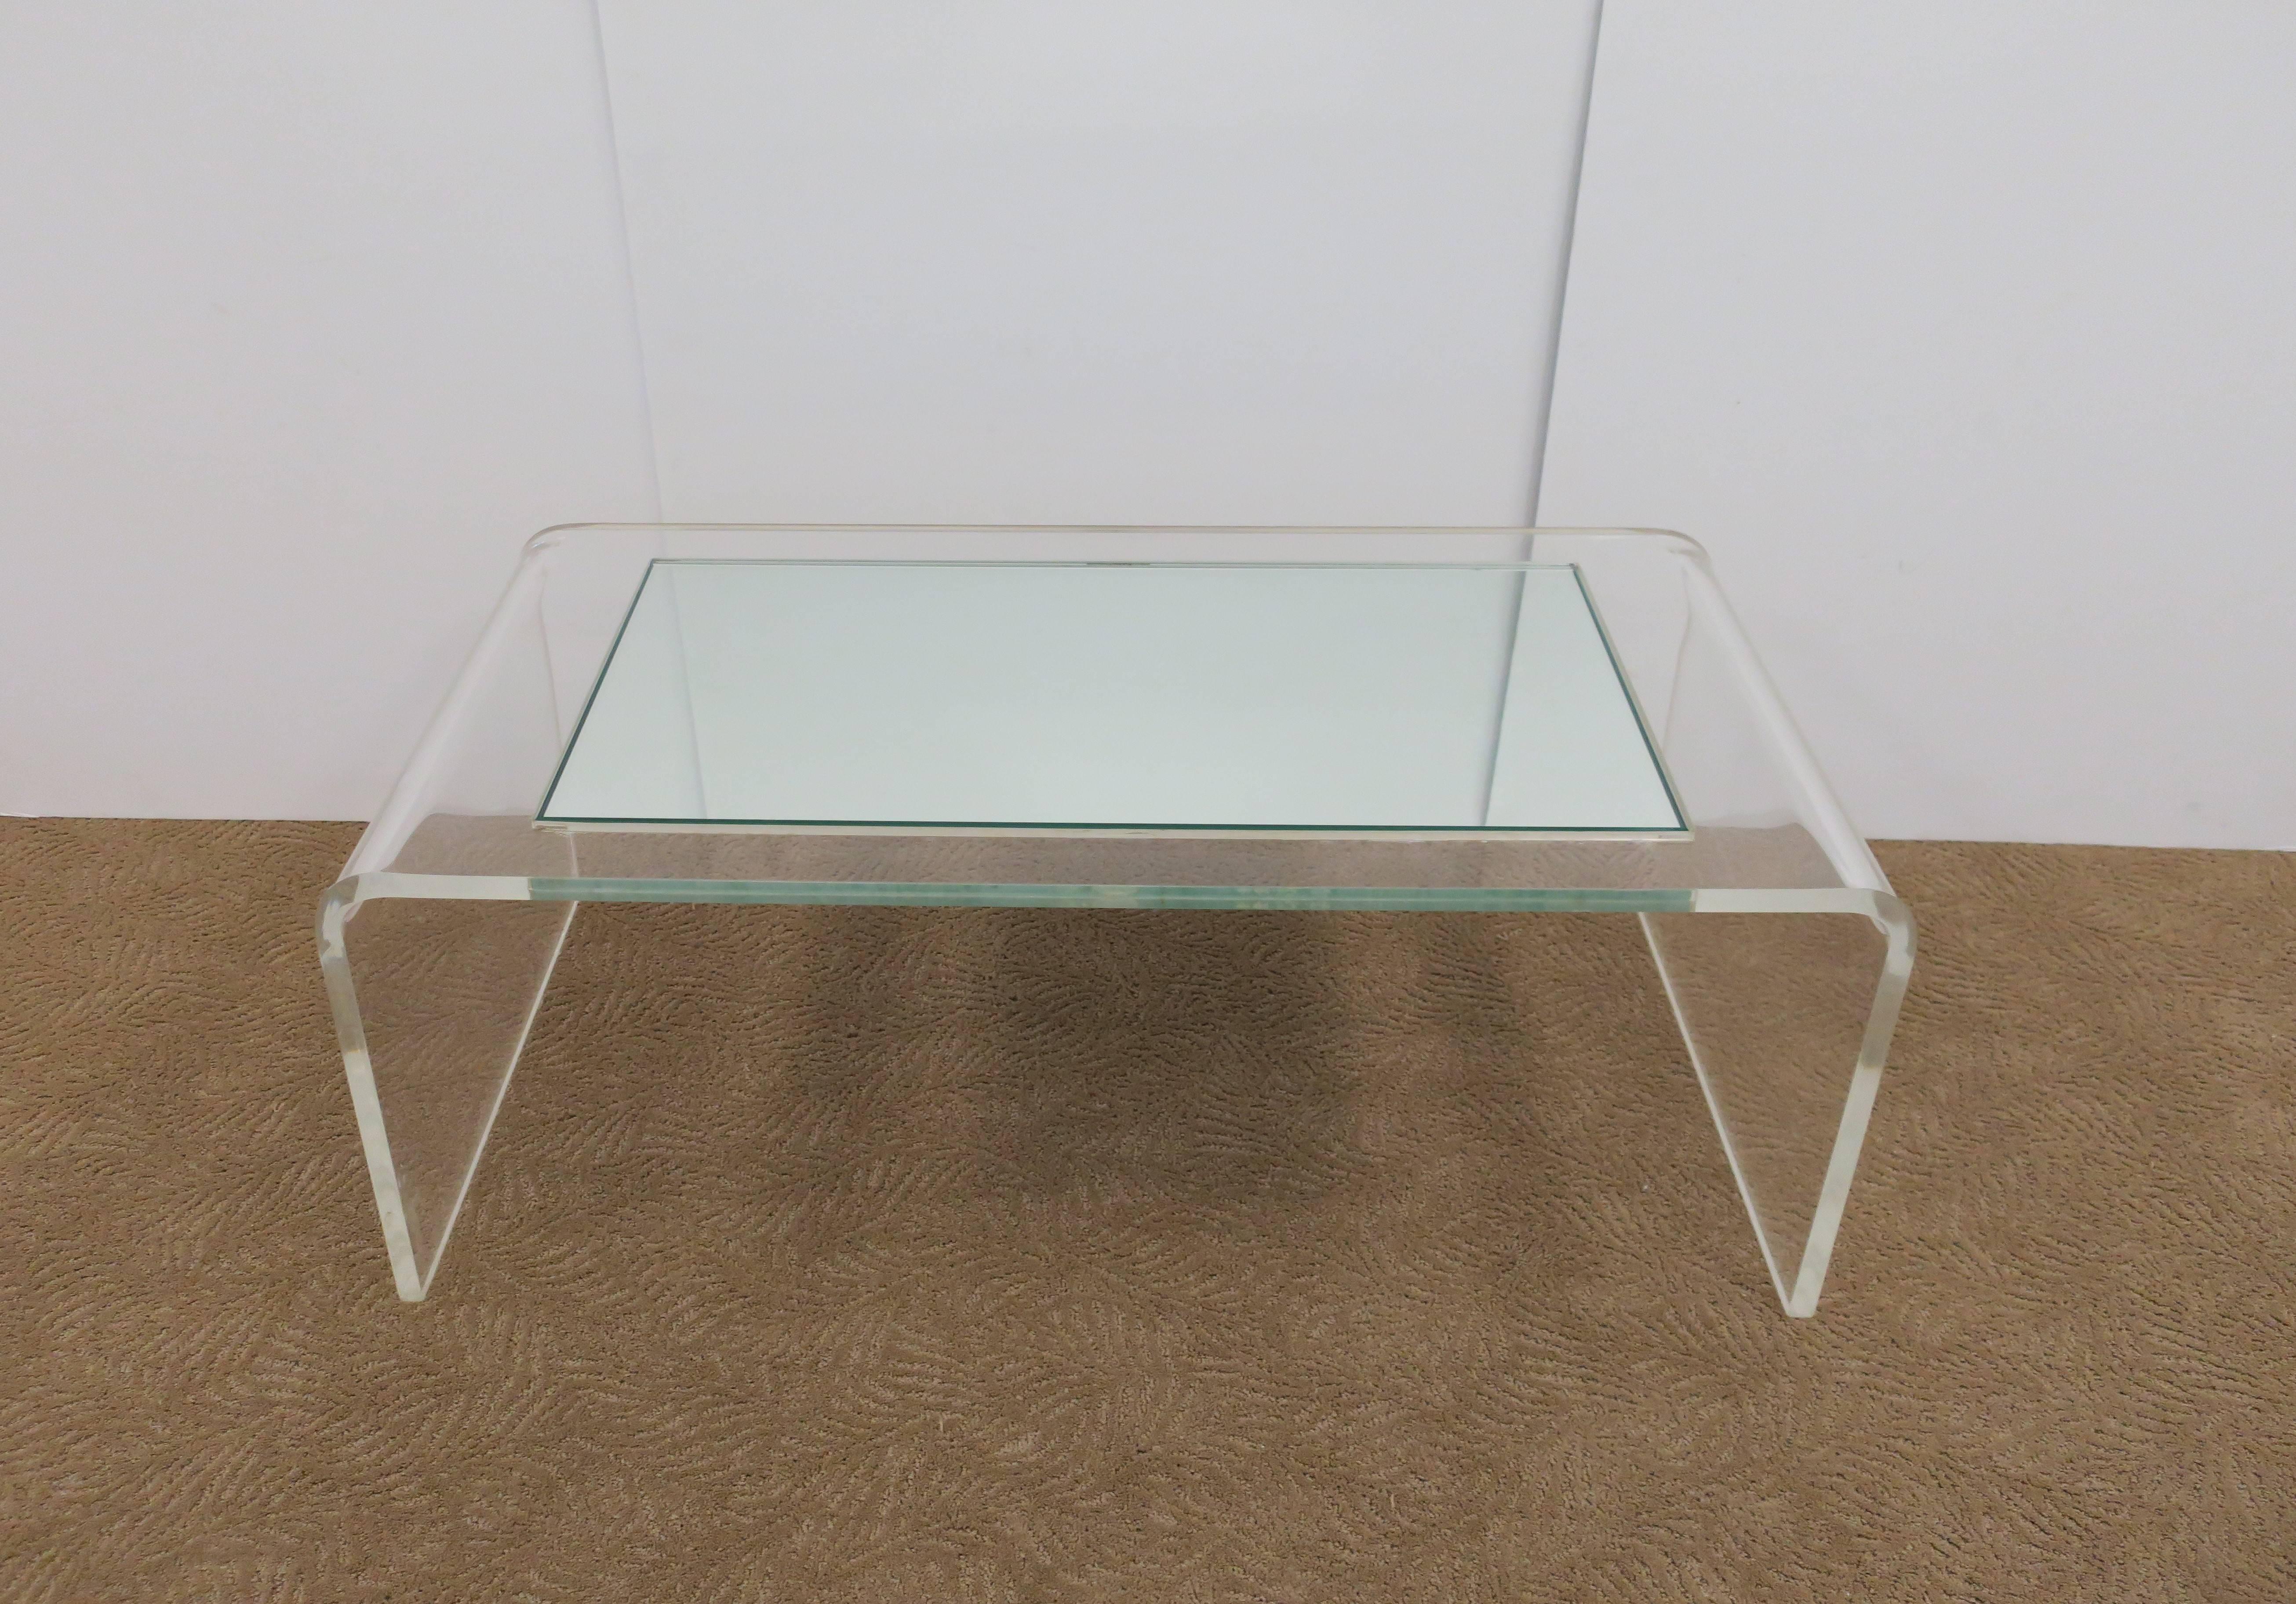 A '70s Modern Lucite and glass mirror 'waterfall' coffee table in the style of designer Charles Hollis Jones, circa 1970s. A custom mirrored glass top at 3/8